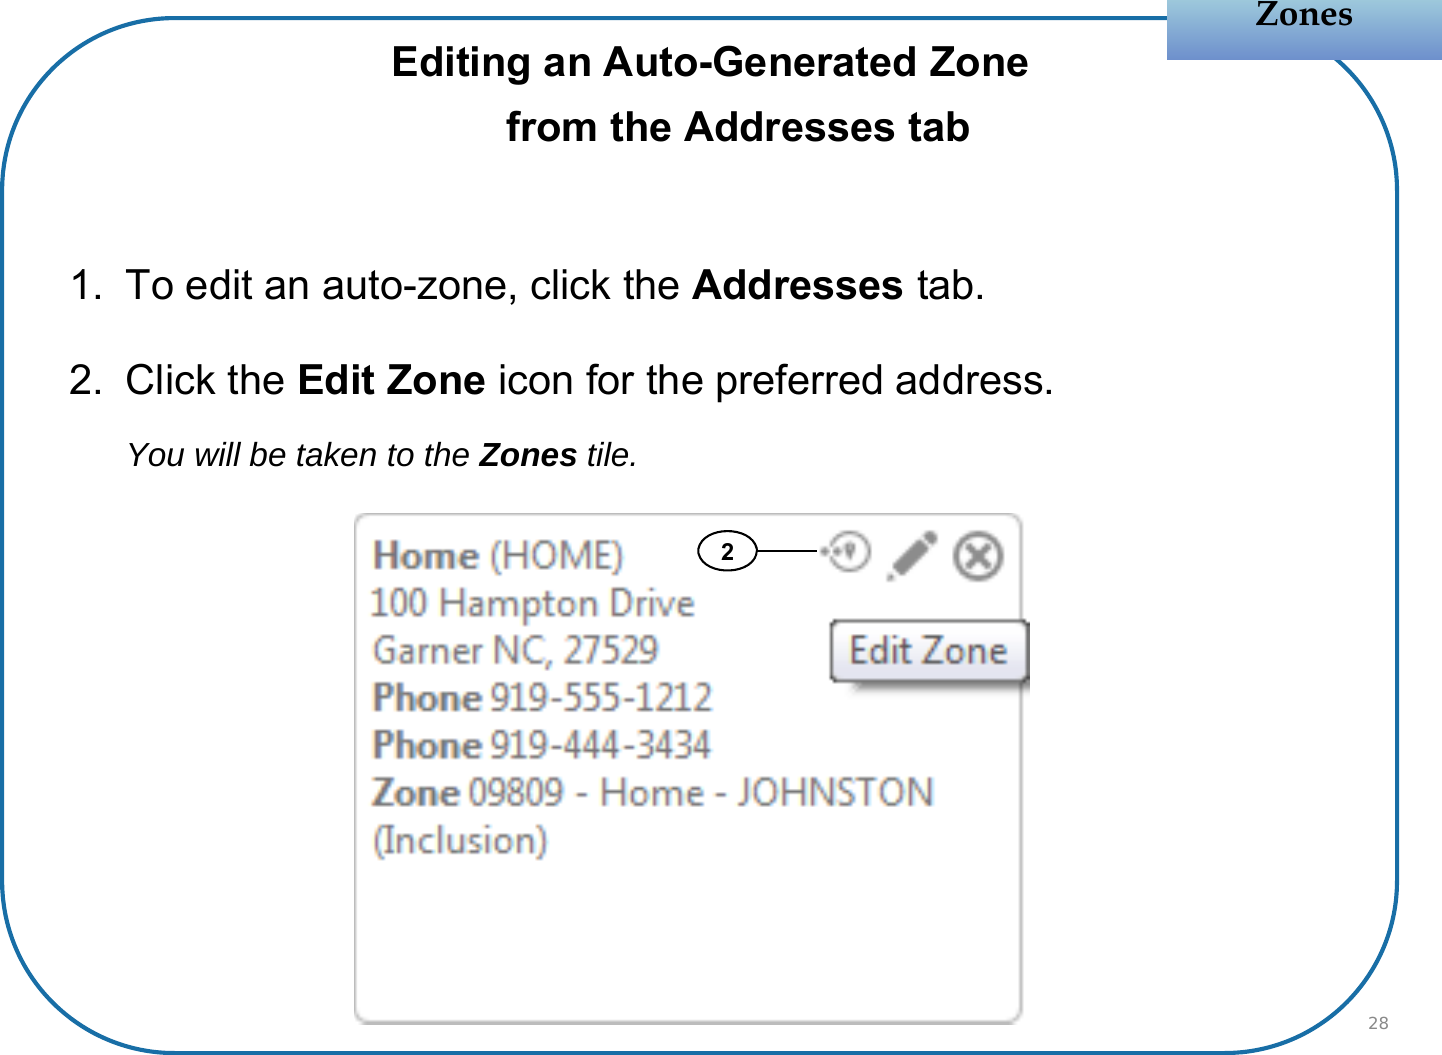 Editing an Auto-Generated Zonefrom the Addresses tab 1. To edit an auto-zone, click the Addresses tab.2. Click the Edit Zone icon for the preferred address.You will be taken to the Zones tile.ZonesZones282